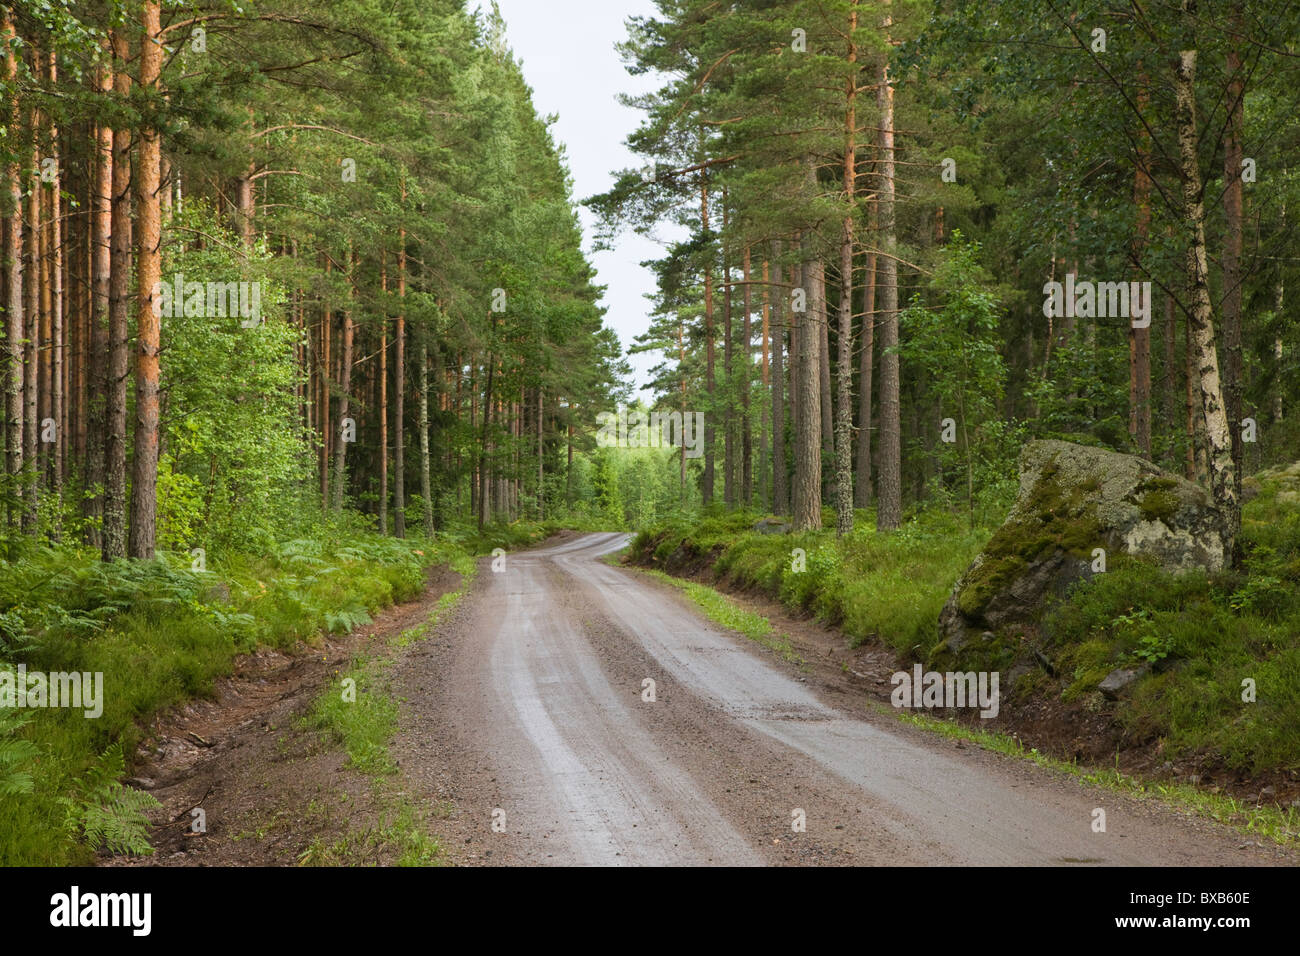 Dirt road through forest Stock Photo